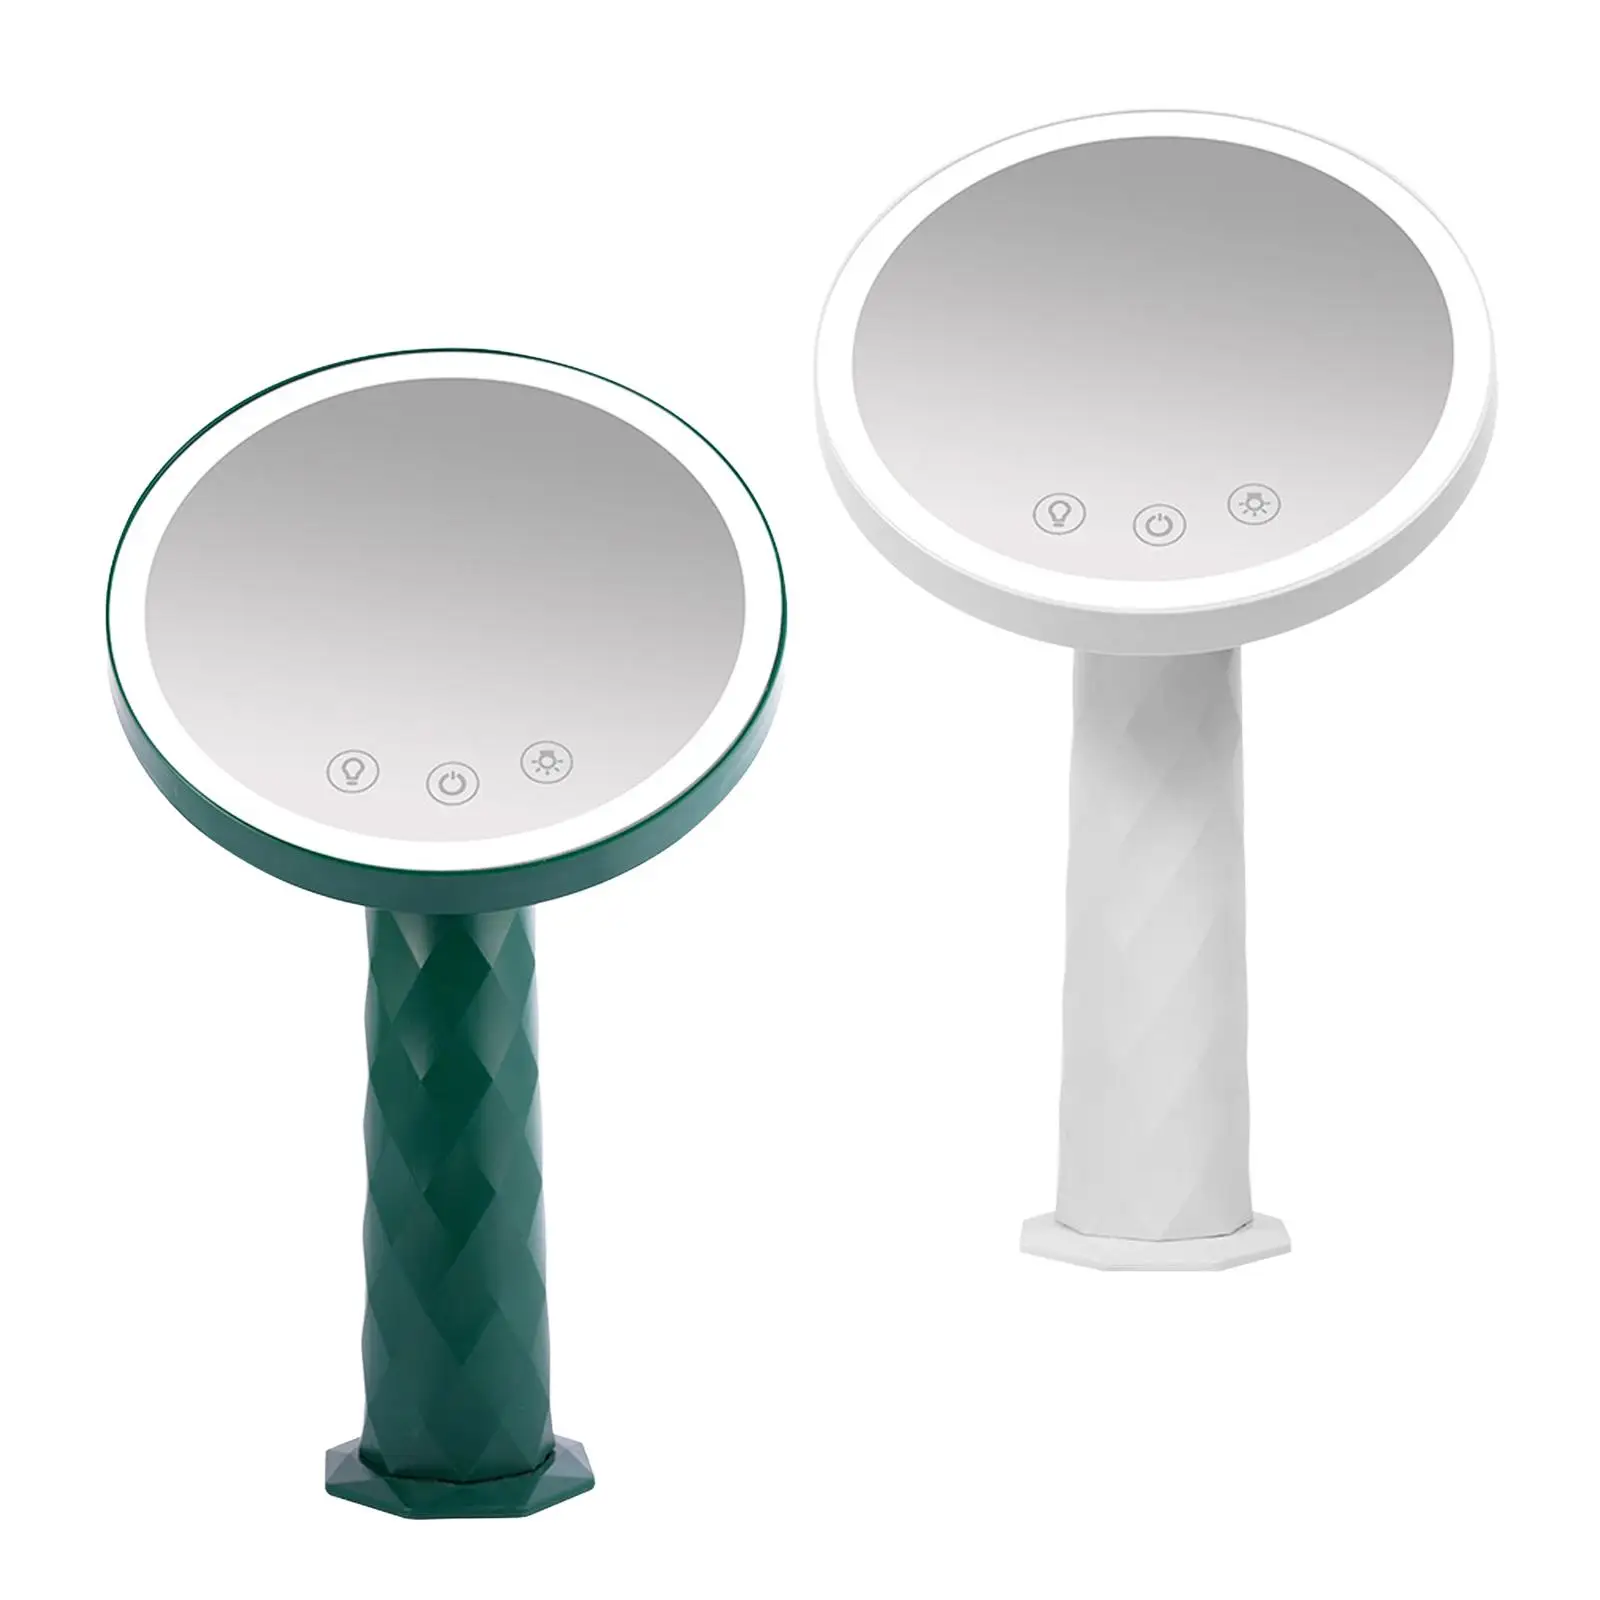 Travel Makeup Mirror Tabletop Lamp Stable Base Lighted Beauty Mirror for Bathroom Hotel Dressing Table Girl Gift Bedroom